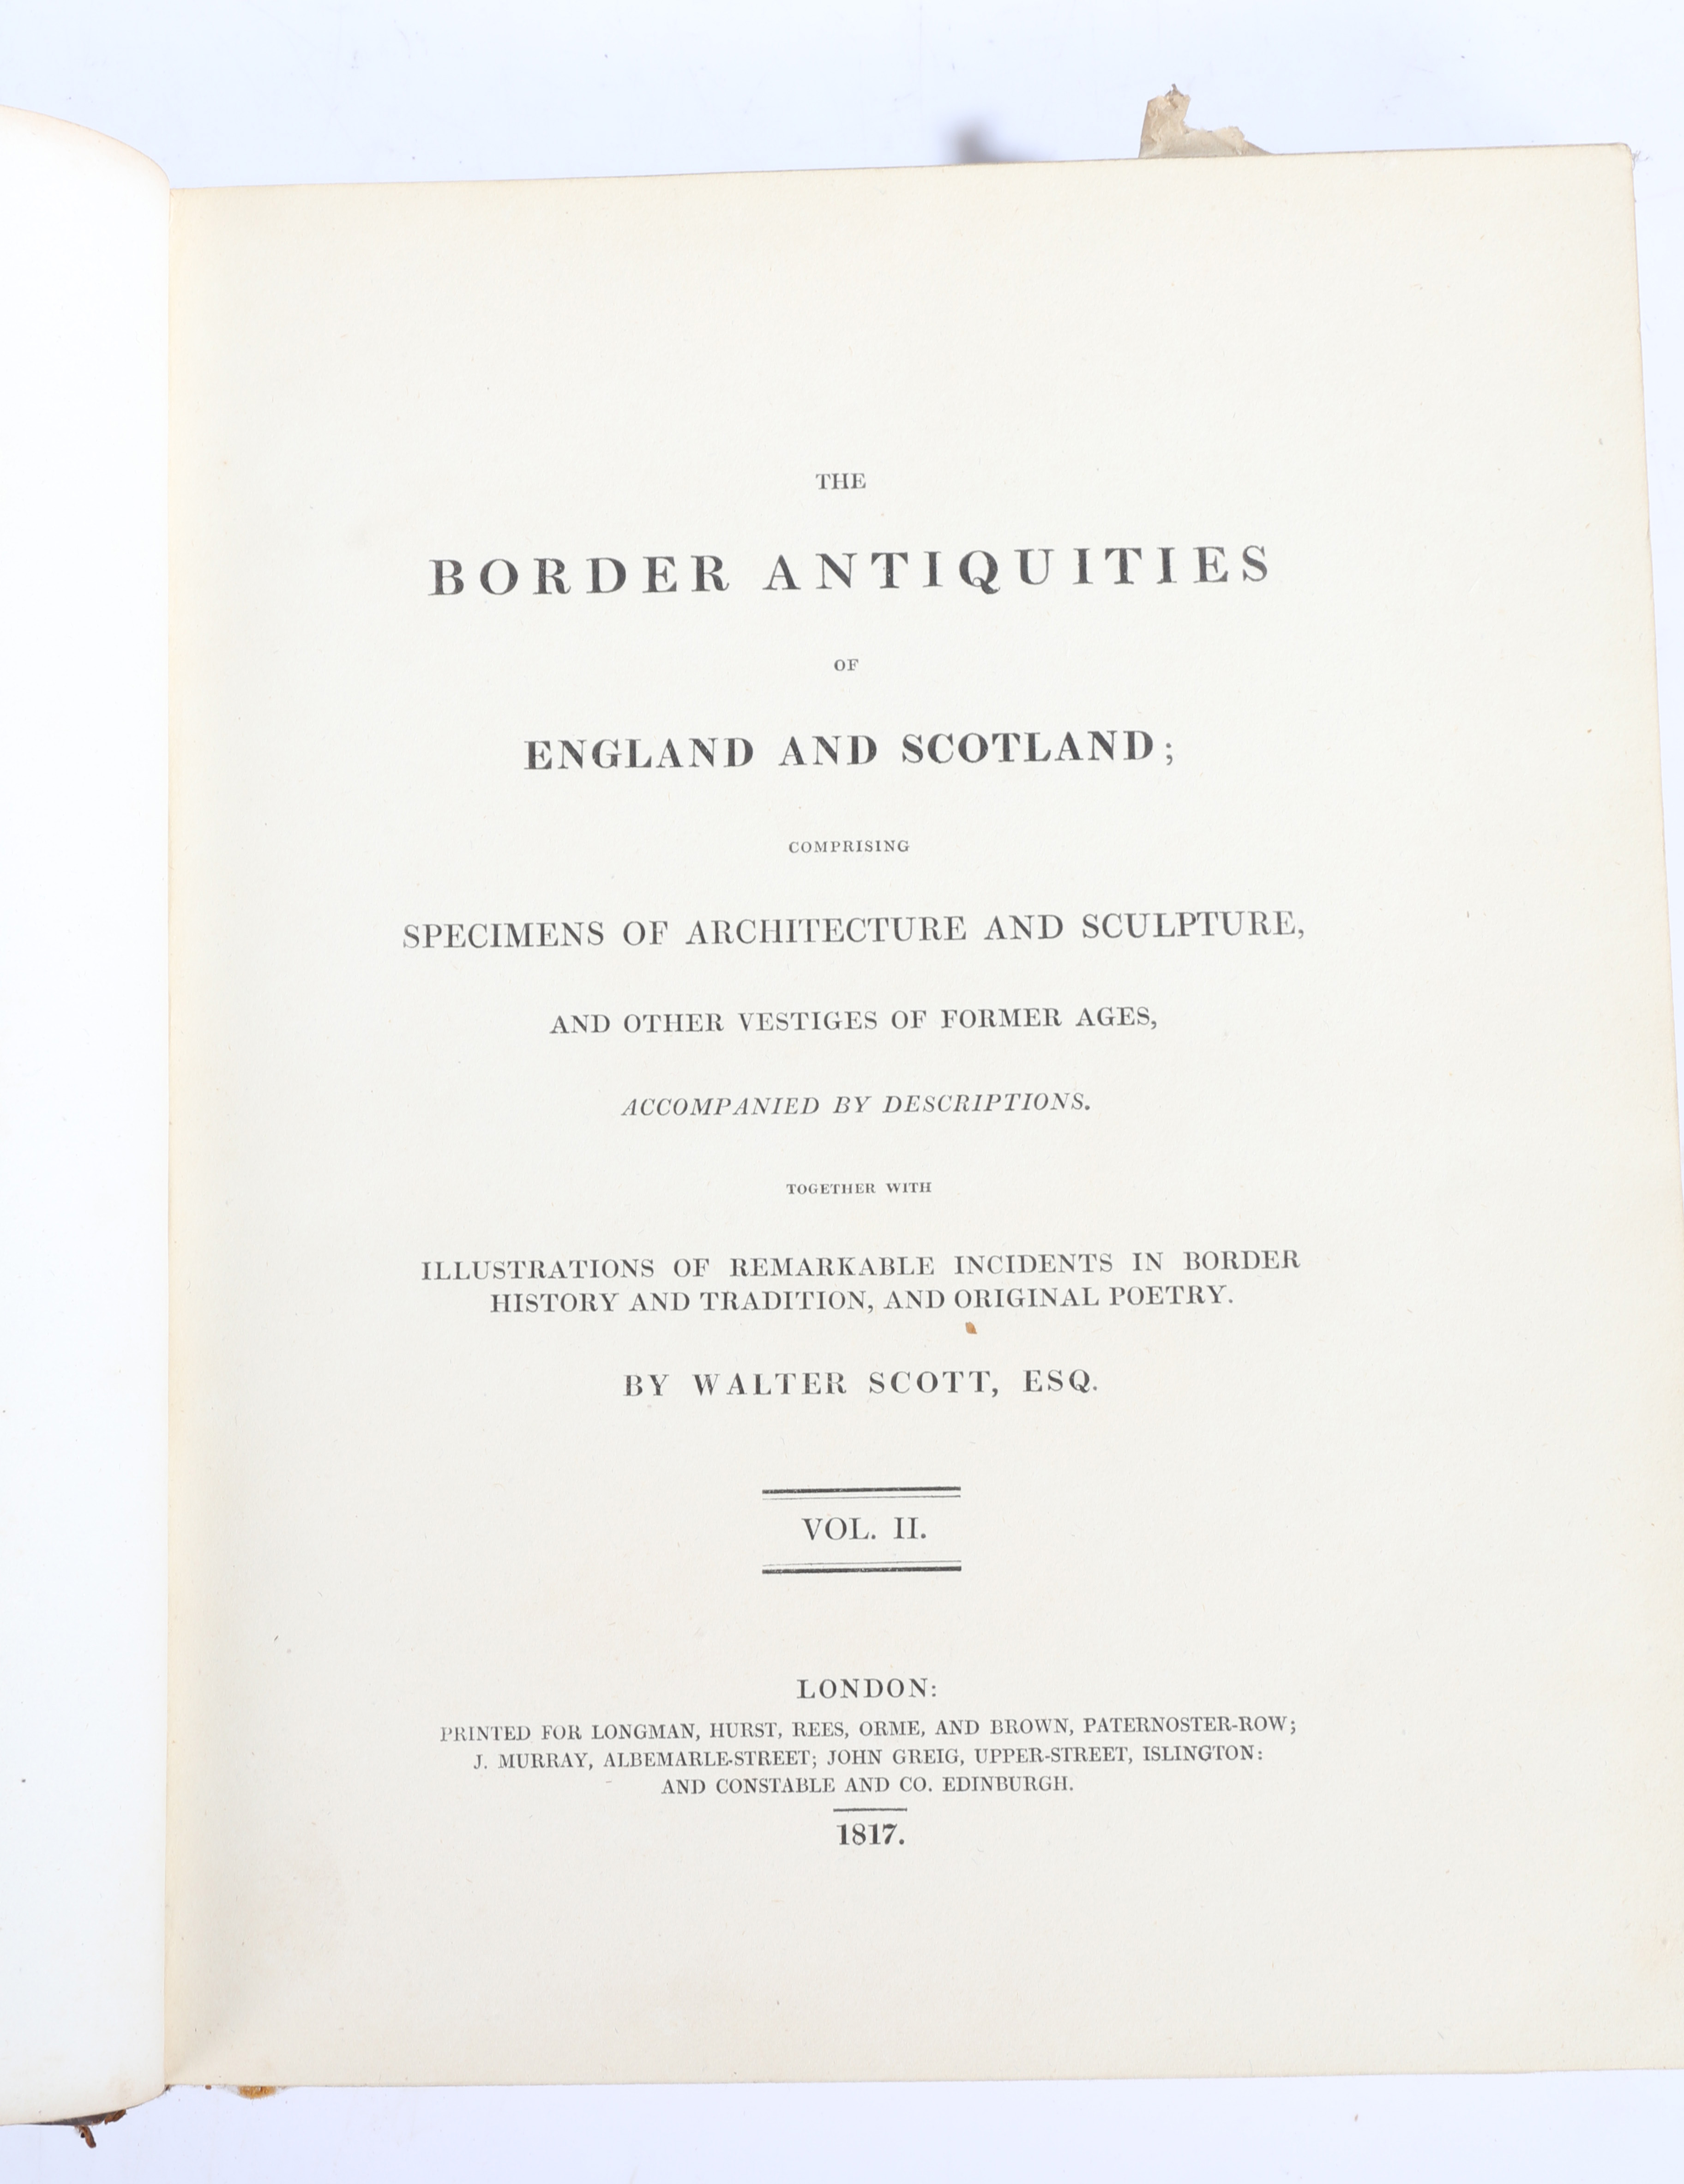 Walter Scott ESQ "The Border Antiquities of England and Scotland comprising of architecture and - Image 7 of 13